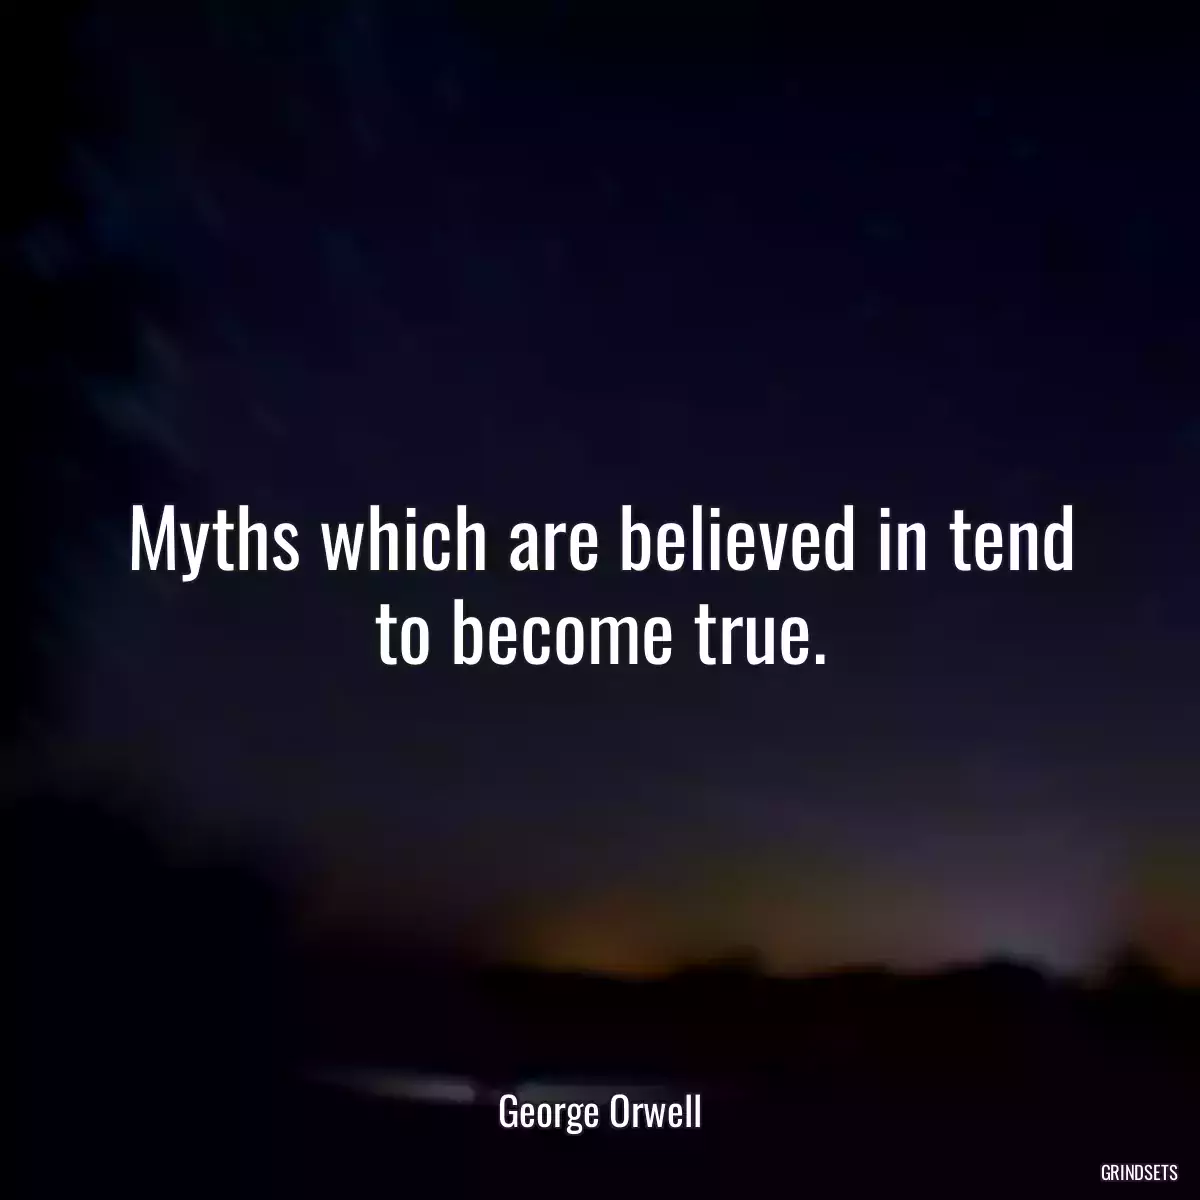 Myths which are believed in tend to become true.